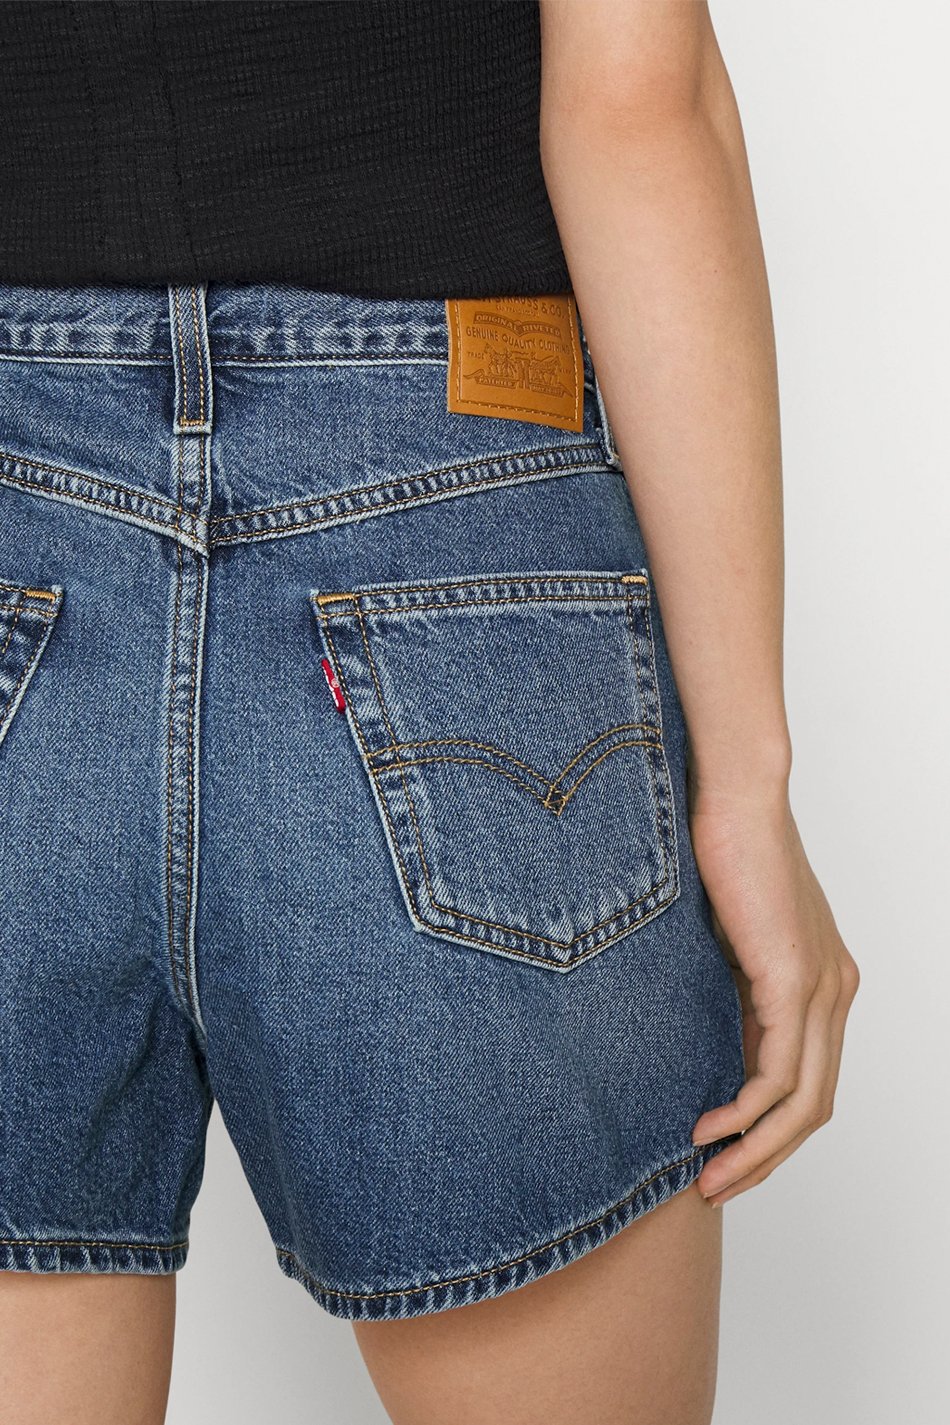 Levi’s You Sure Can 80s Mom Shorts